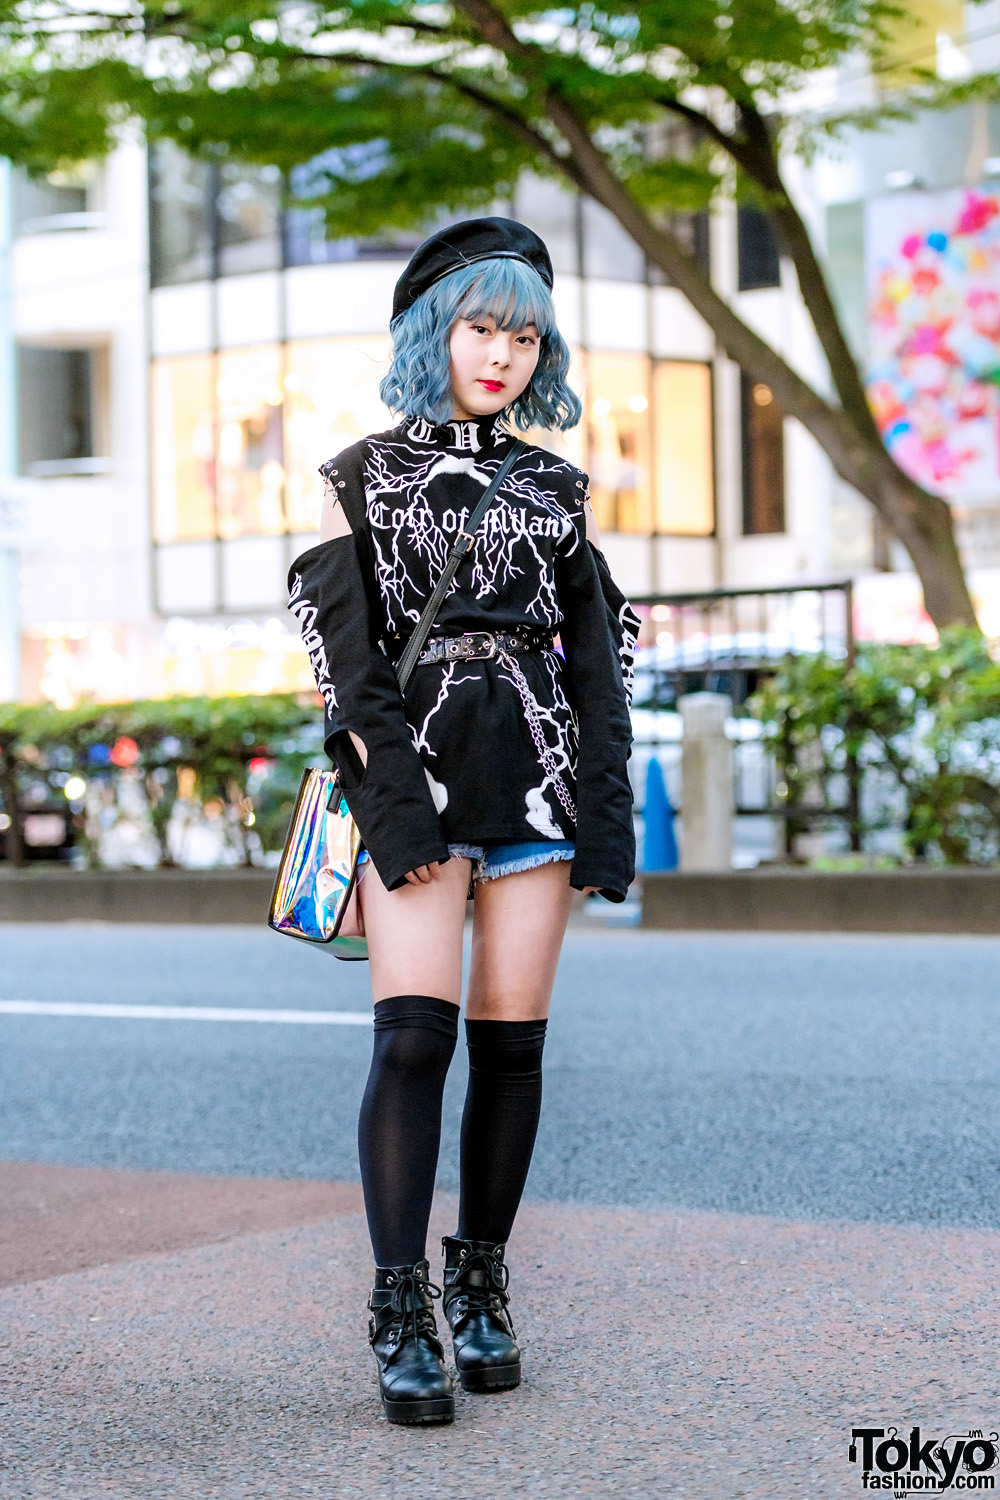 Monochrome Print Street Style in Harajuku w/ Blue Hair, Cut-Out Shoulder Top, Denim Shorts, Ankle Boots & Sling Bag